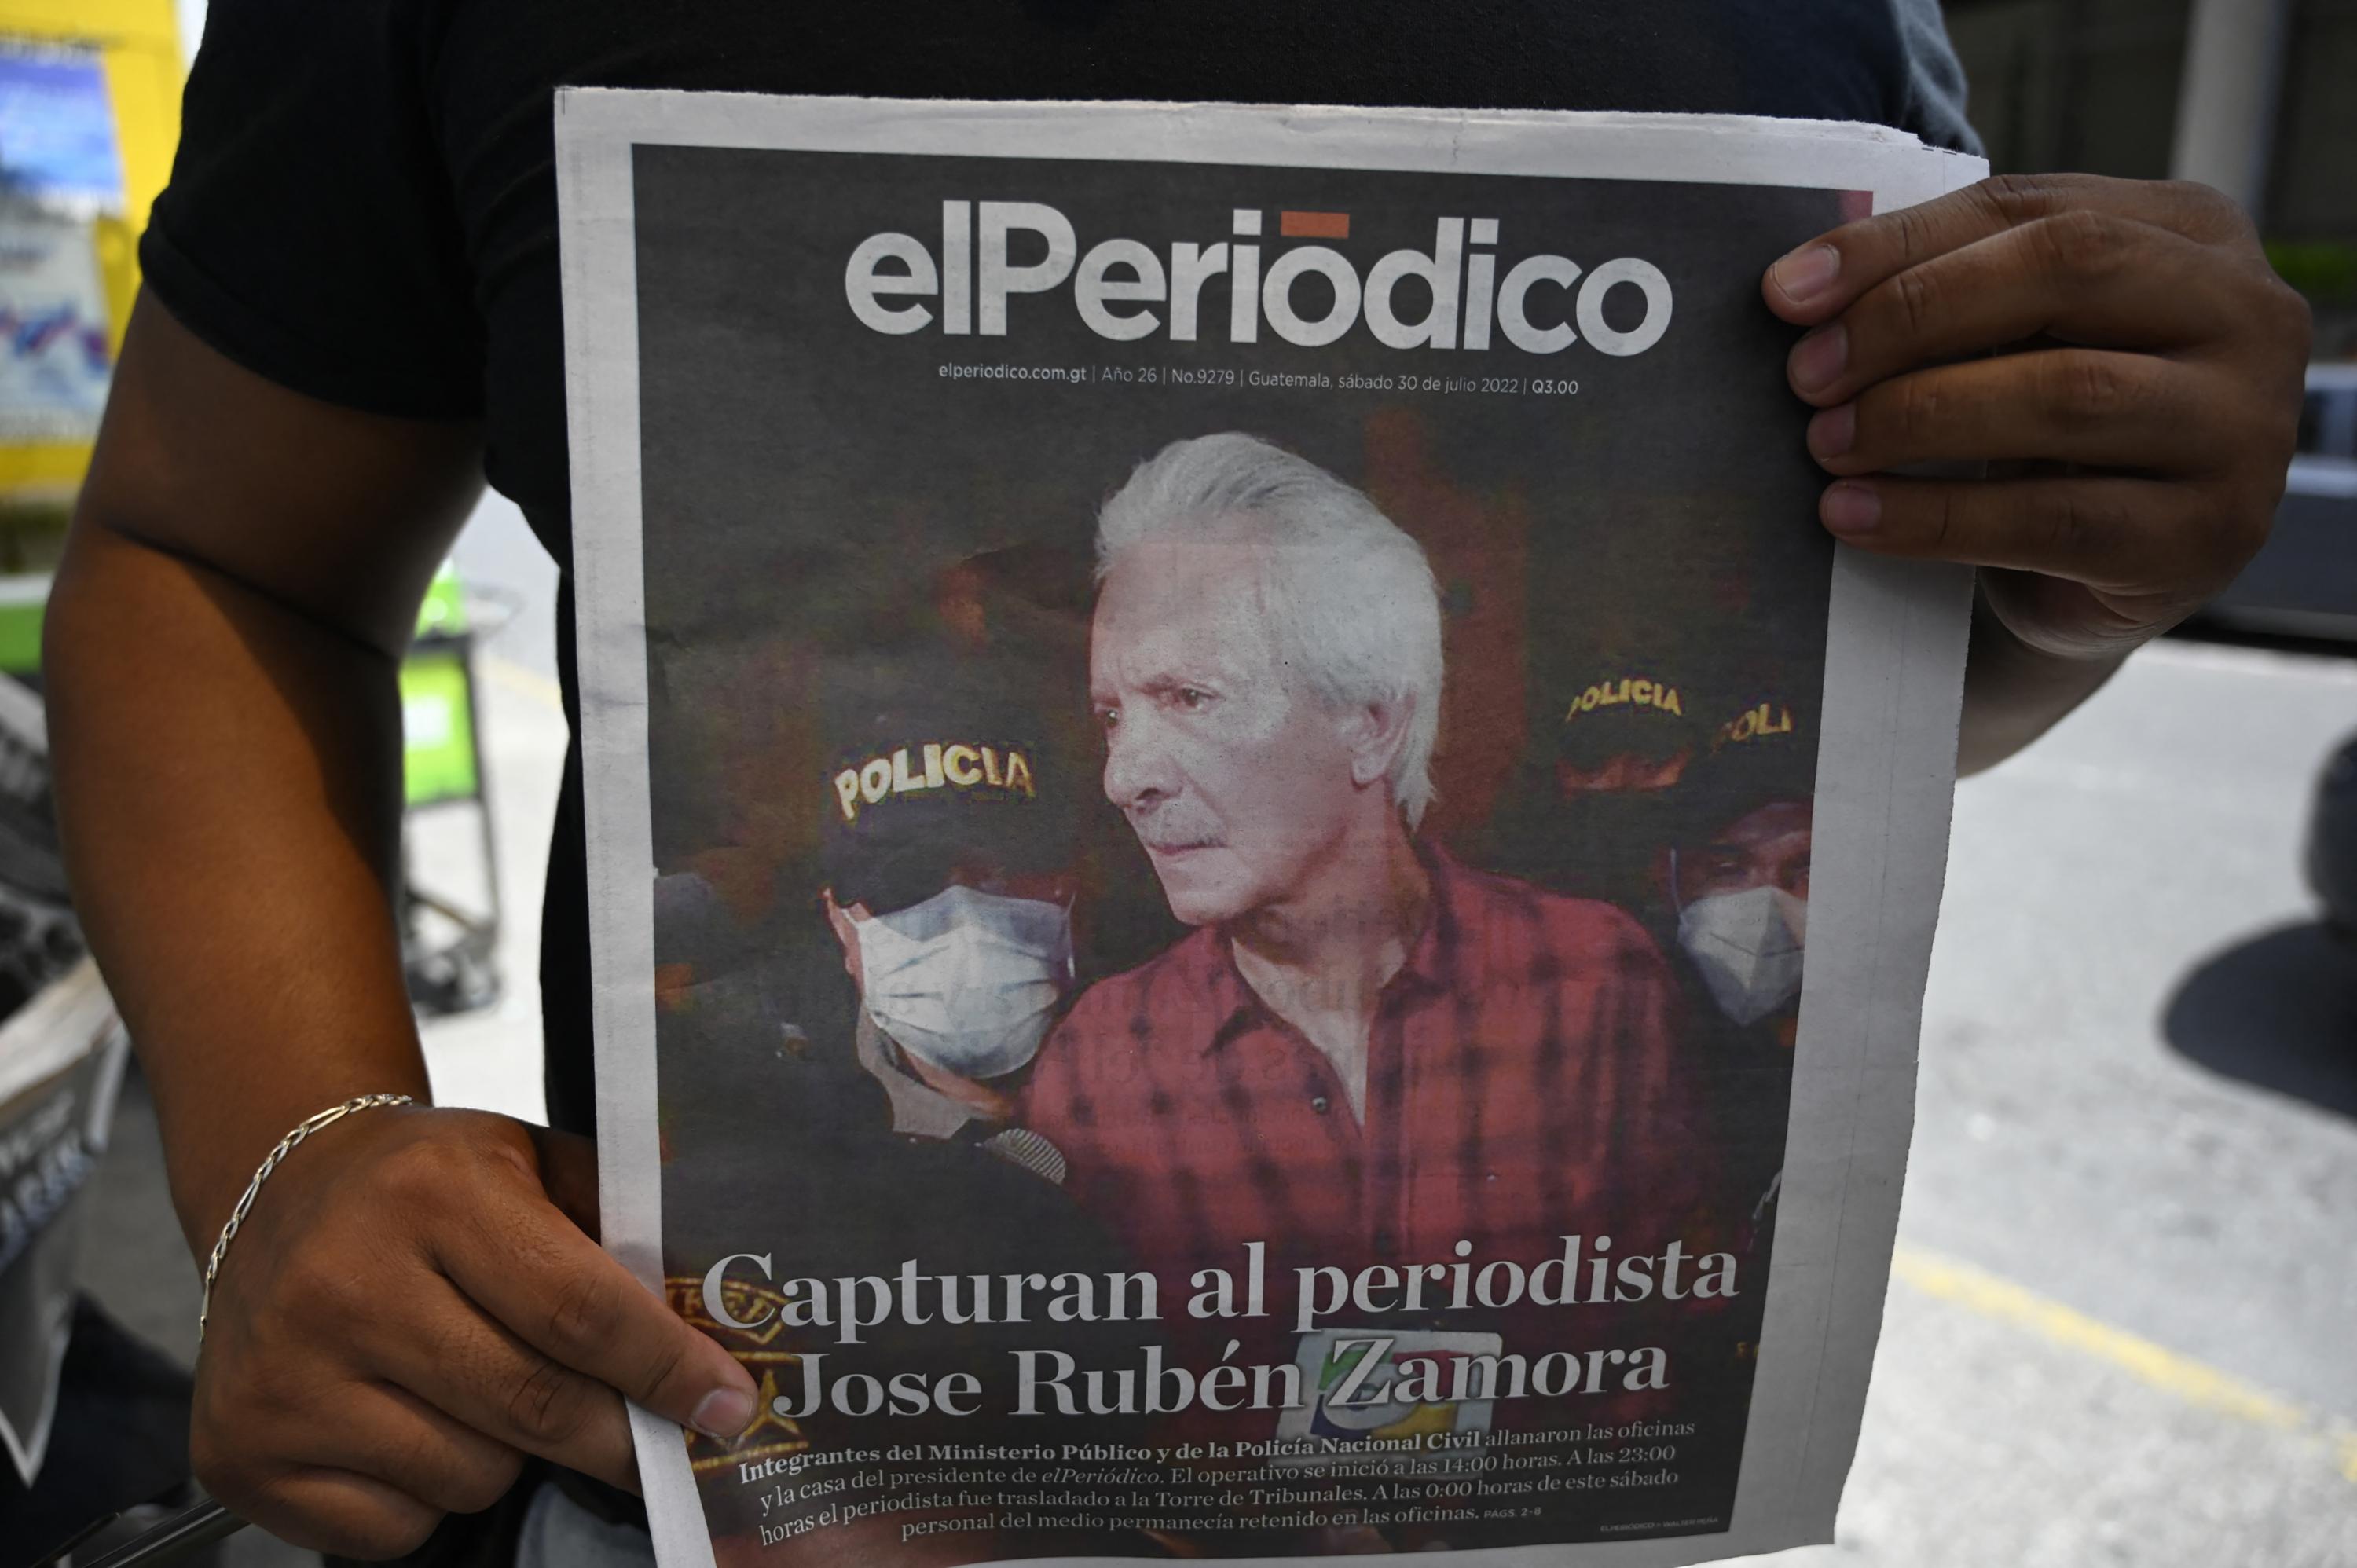 A Guatemalan journalist protests the arrest of José Rubén Zamora, president of the daily newspaper elPeriódico, outside the Palace of Justice in Guatemala City on July 30, 2022. Photo Johan Ordóñez/AFP